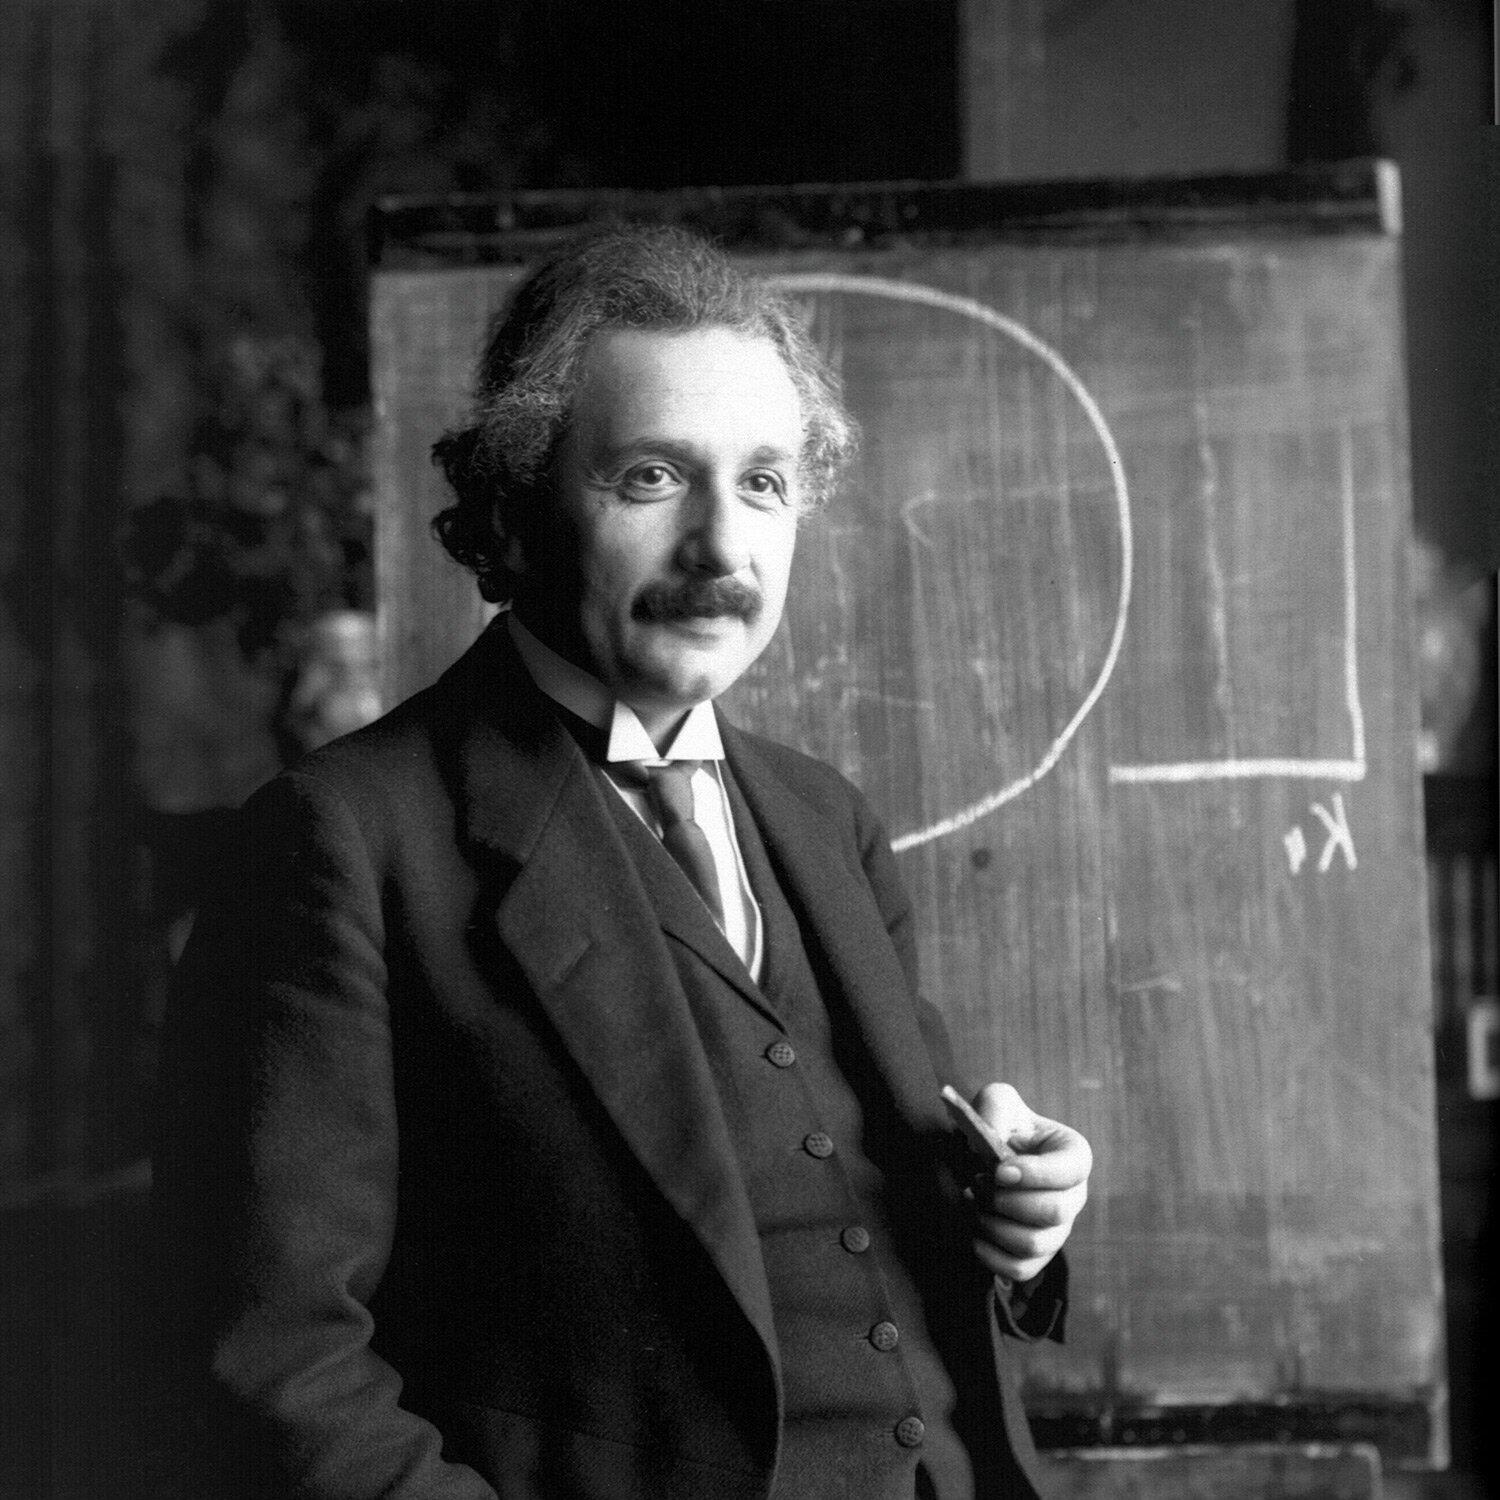 The IRC was founded at the call of Albert Einstein